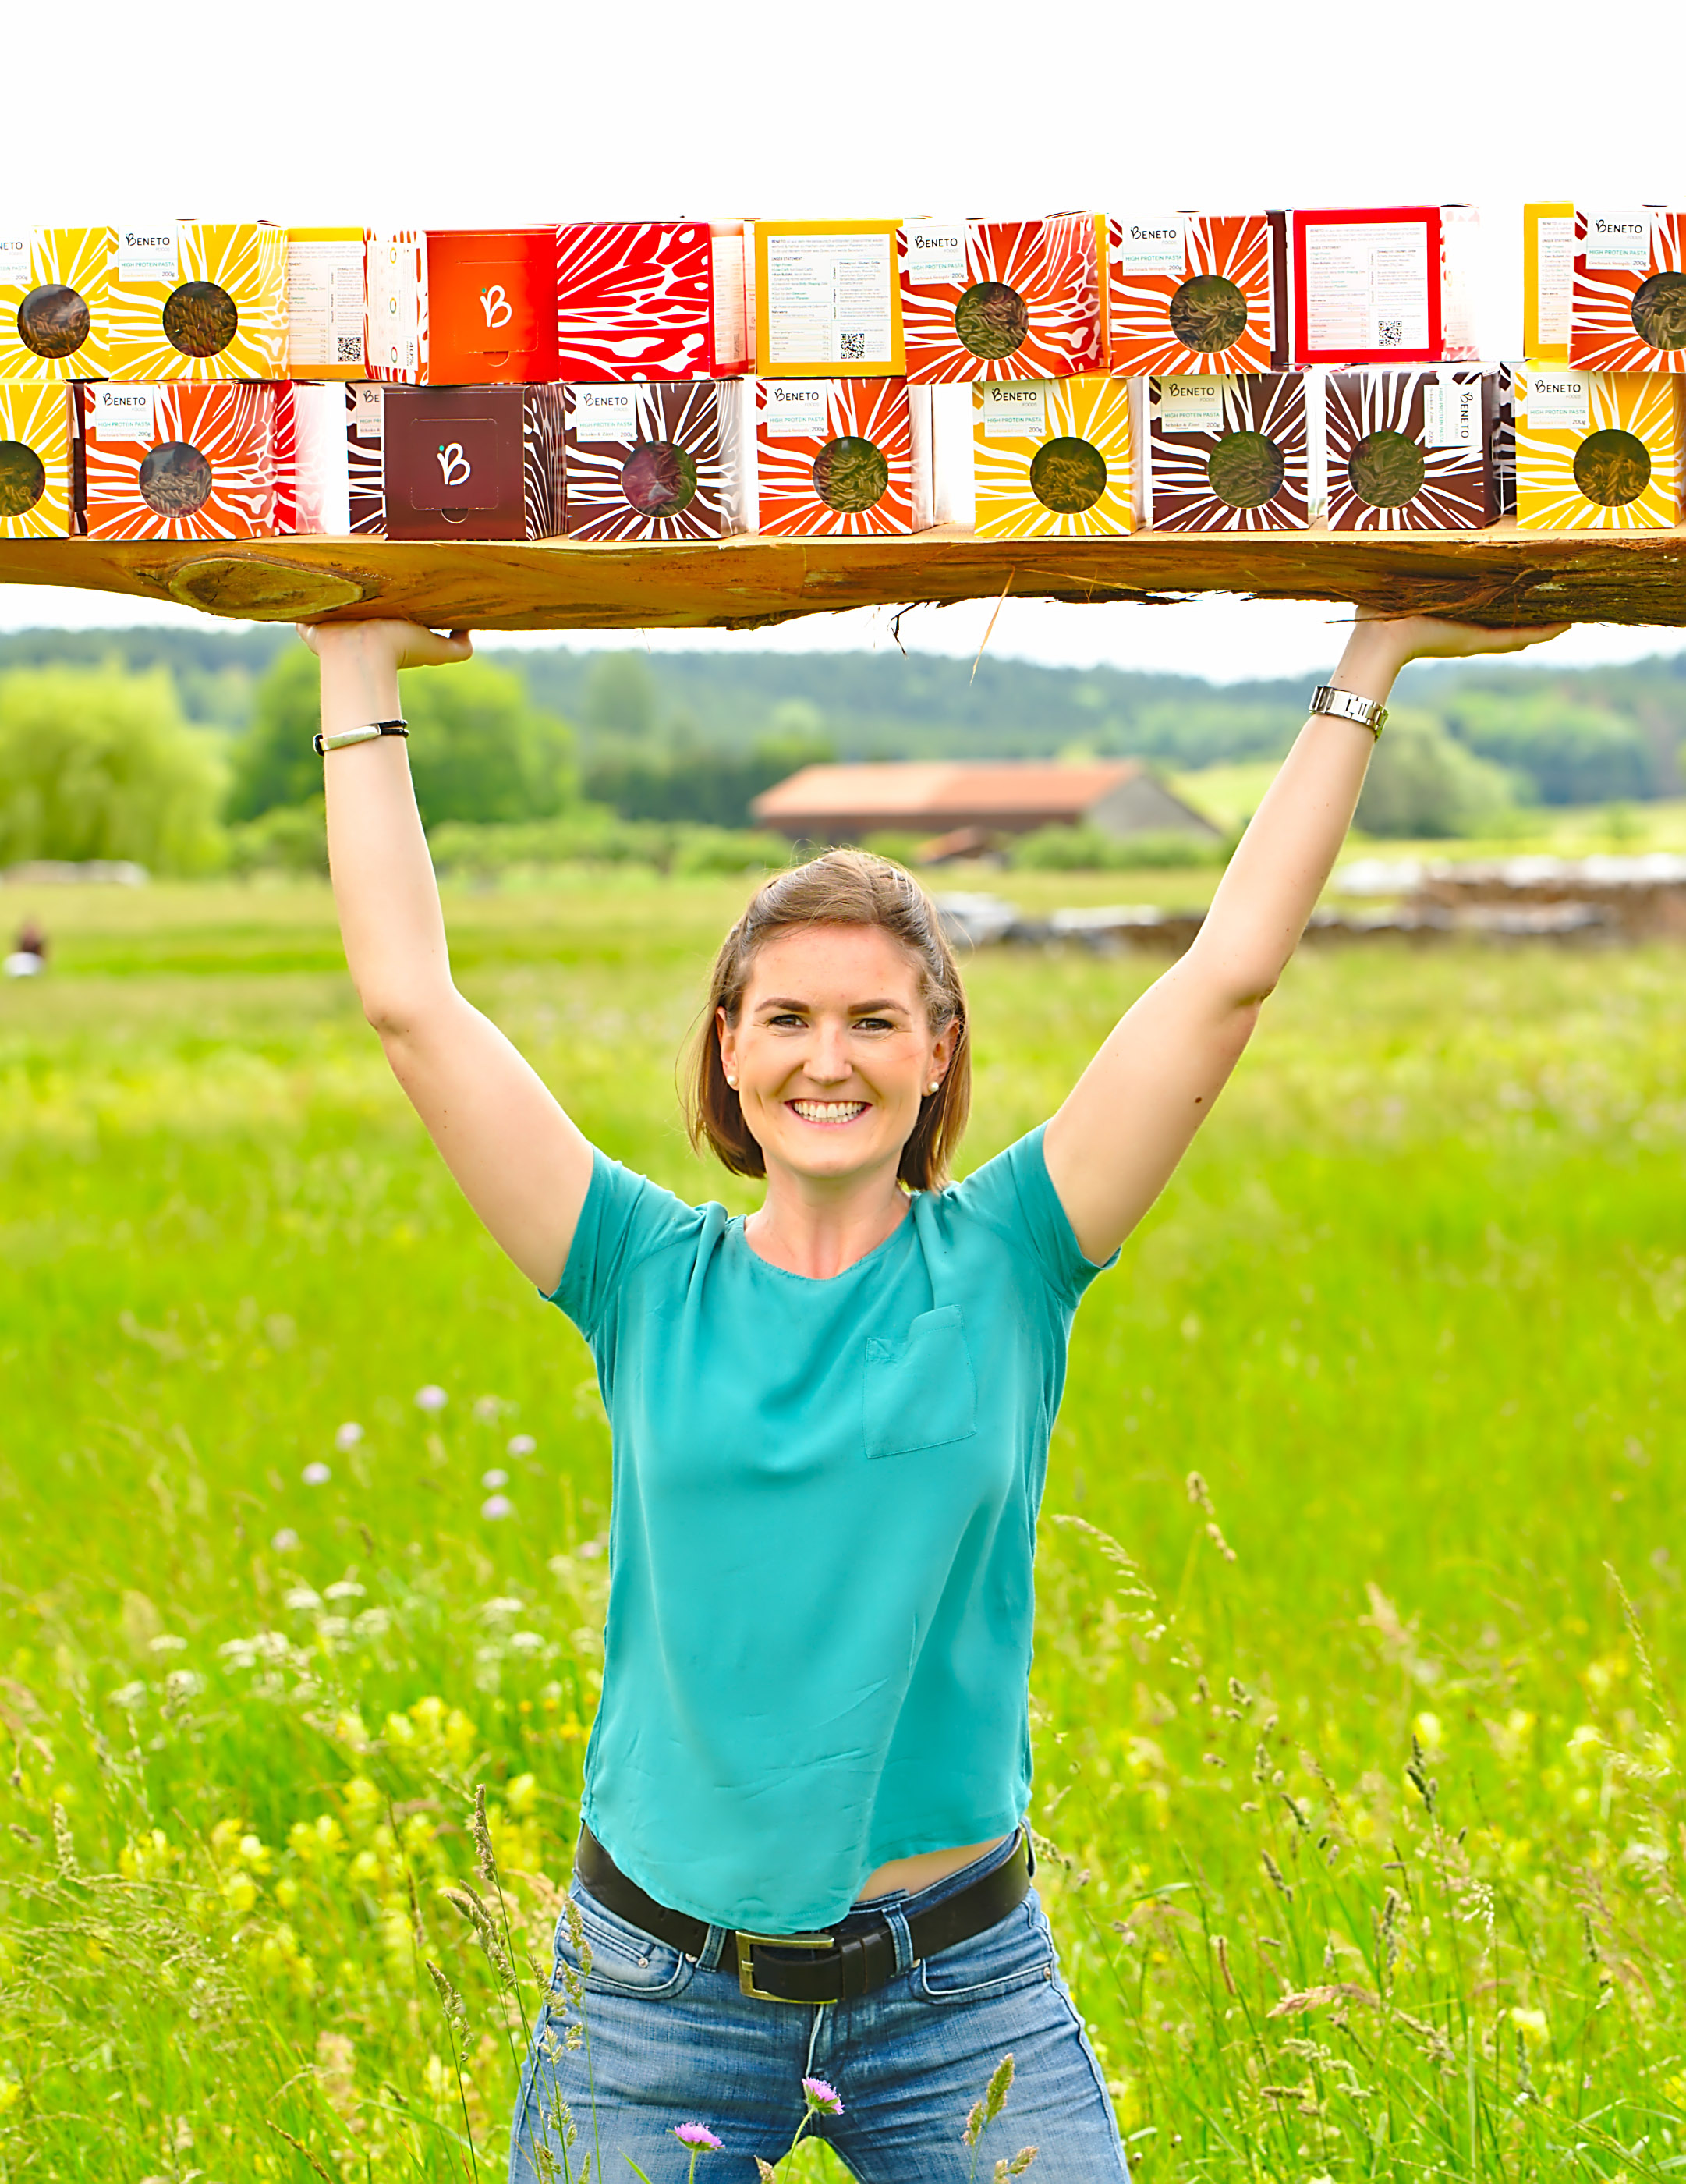 The head of the company in a flowering meadow, lifting a board with many colourful noodle packages.